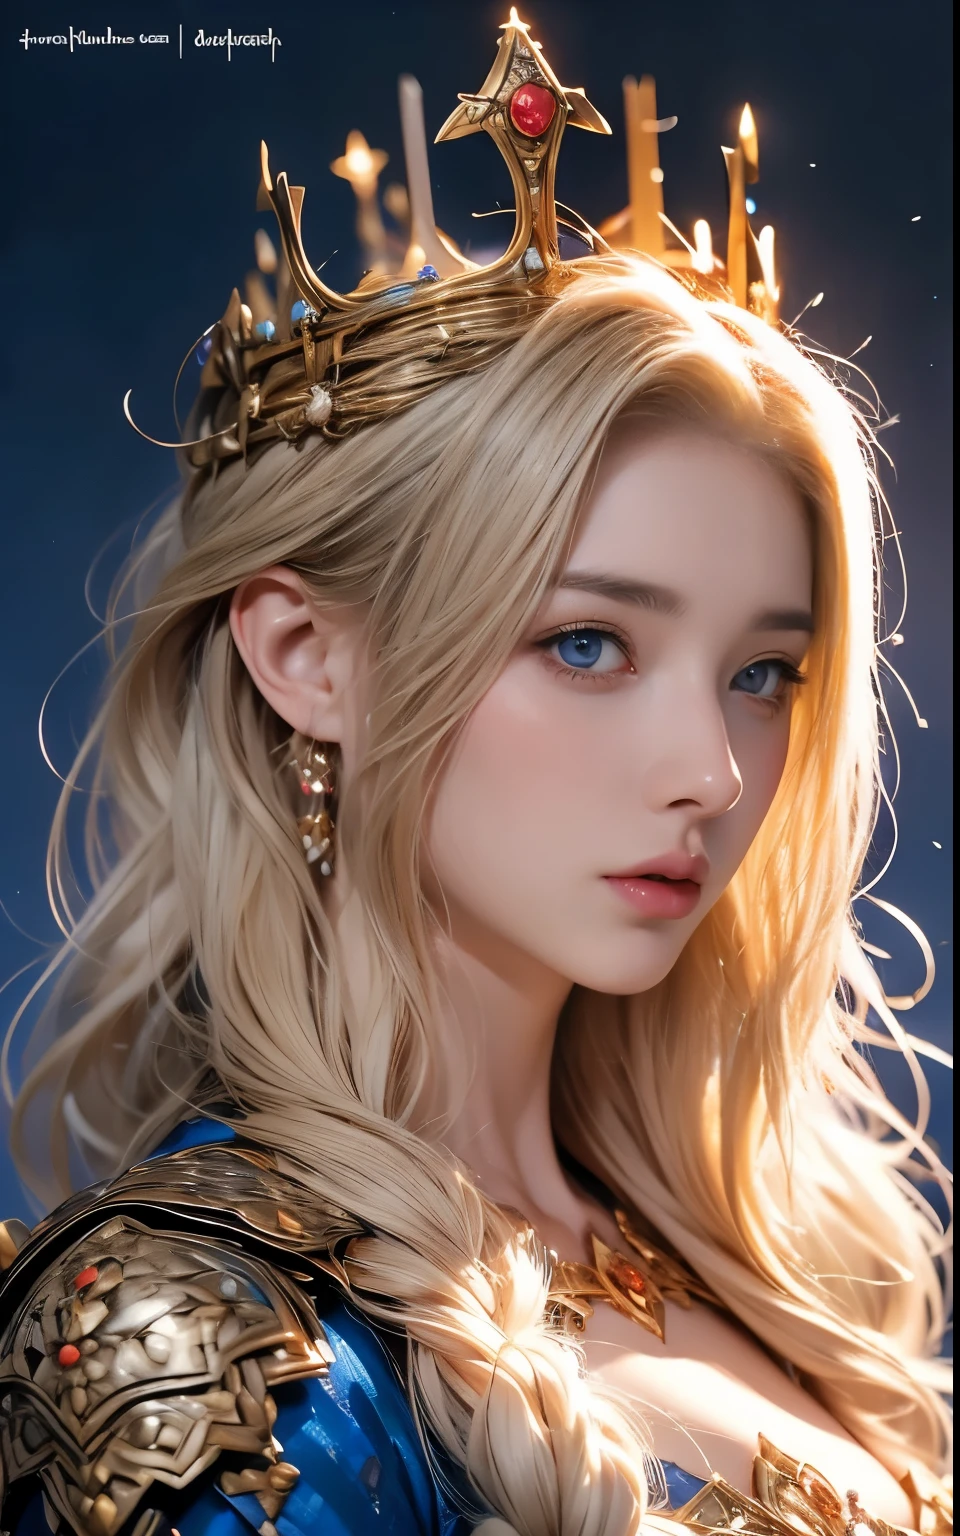 crown luxury , blue eye, blond hair, around 17 years old, (gold ), masterpiece，Best quality at best，A high resolution，8K，((Portrait))，(upper body)，Original photo，real photograph，digital photography，(Female princess in the medieval fantasy style), sexy princess ，blue eye， super colossal breast, round colossal breast ，open kissing lips，Keep your mouth shuegant and charming，((Blushing))，virgin contempt，Calm and handsome，(Medieval fantasy dress，The Beautiful super huge round breast, small waist, perfect colossal breast of princess body, a blue delicate pattern，silver Cloak)，(princes medieval character medieval fantasy style，oc render reflection texture, fighting style,  sexy colossal breast , medieval castle background, slim body, very small waist, 